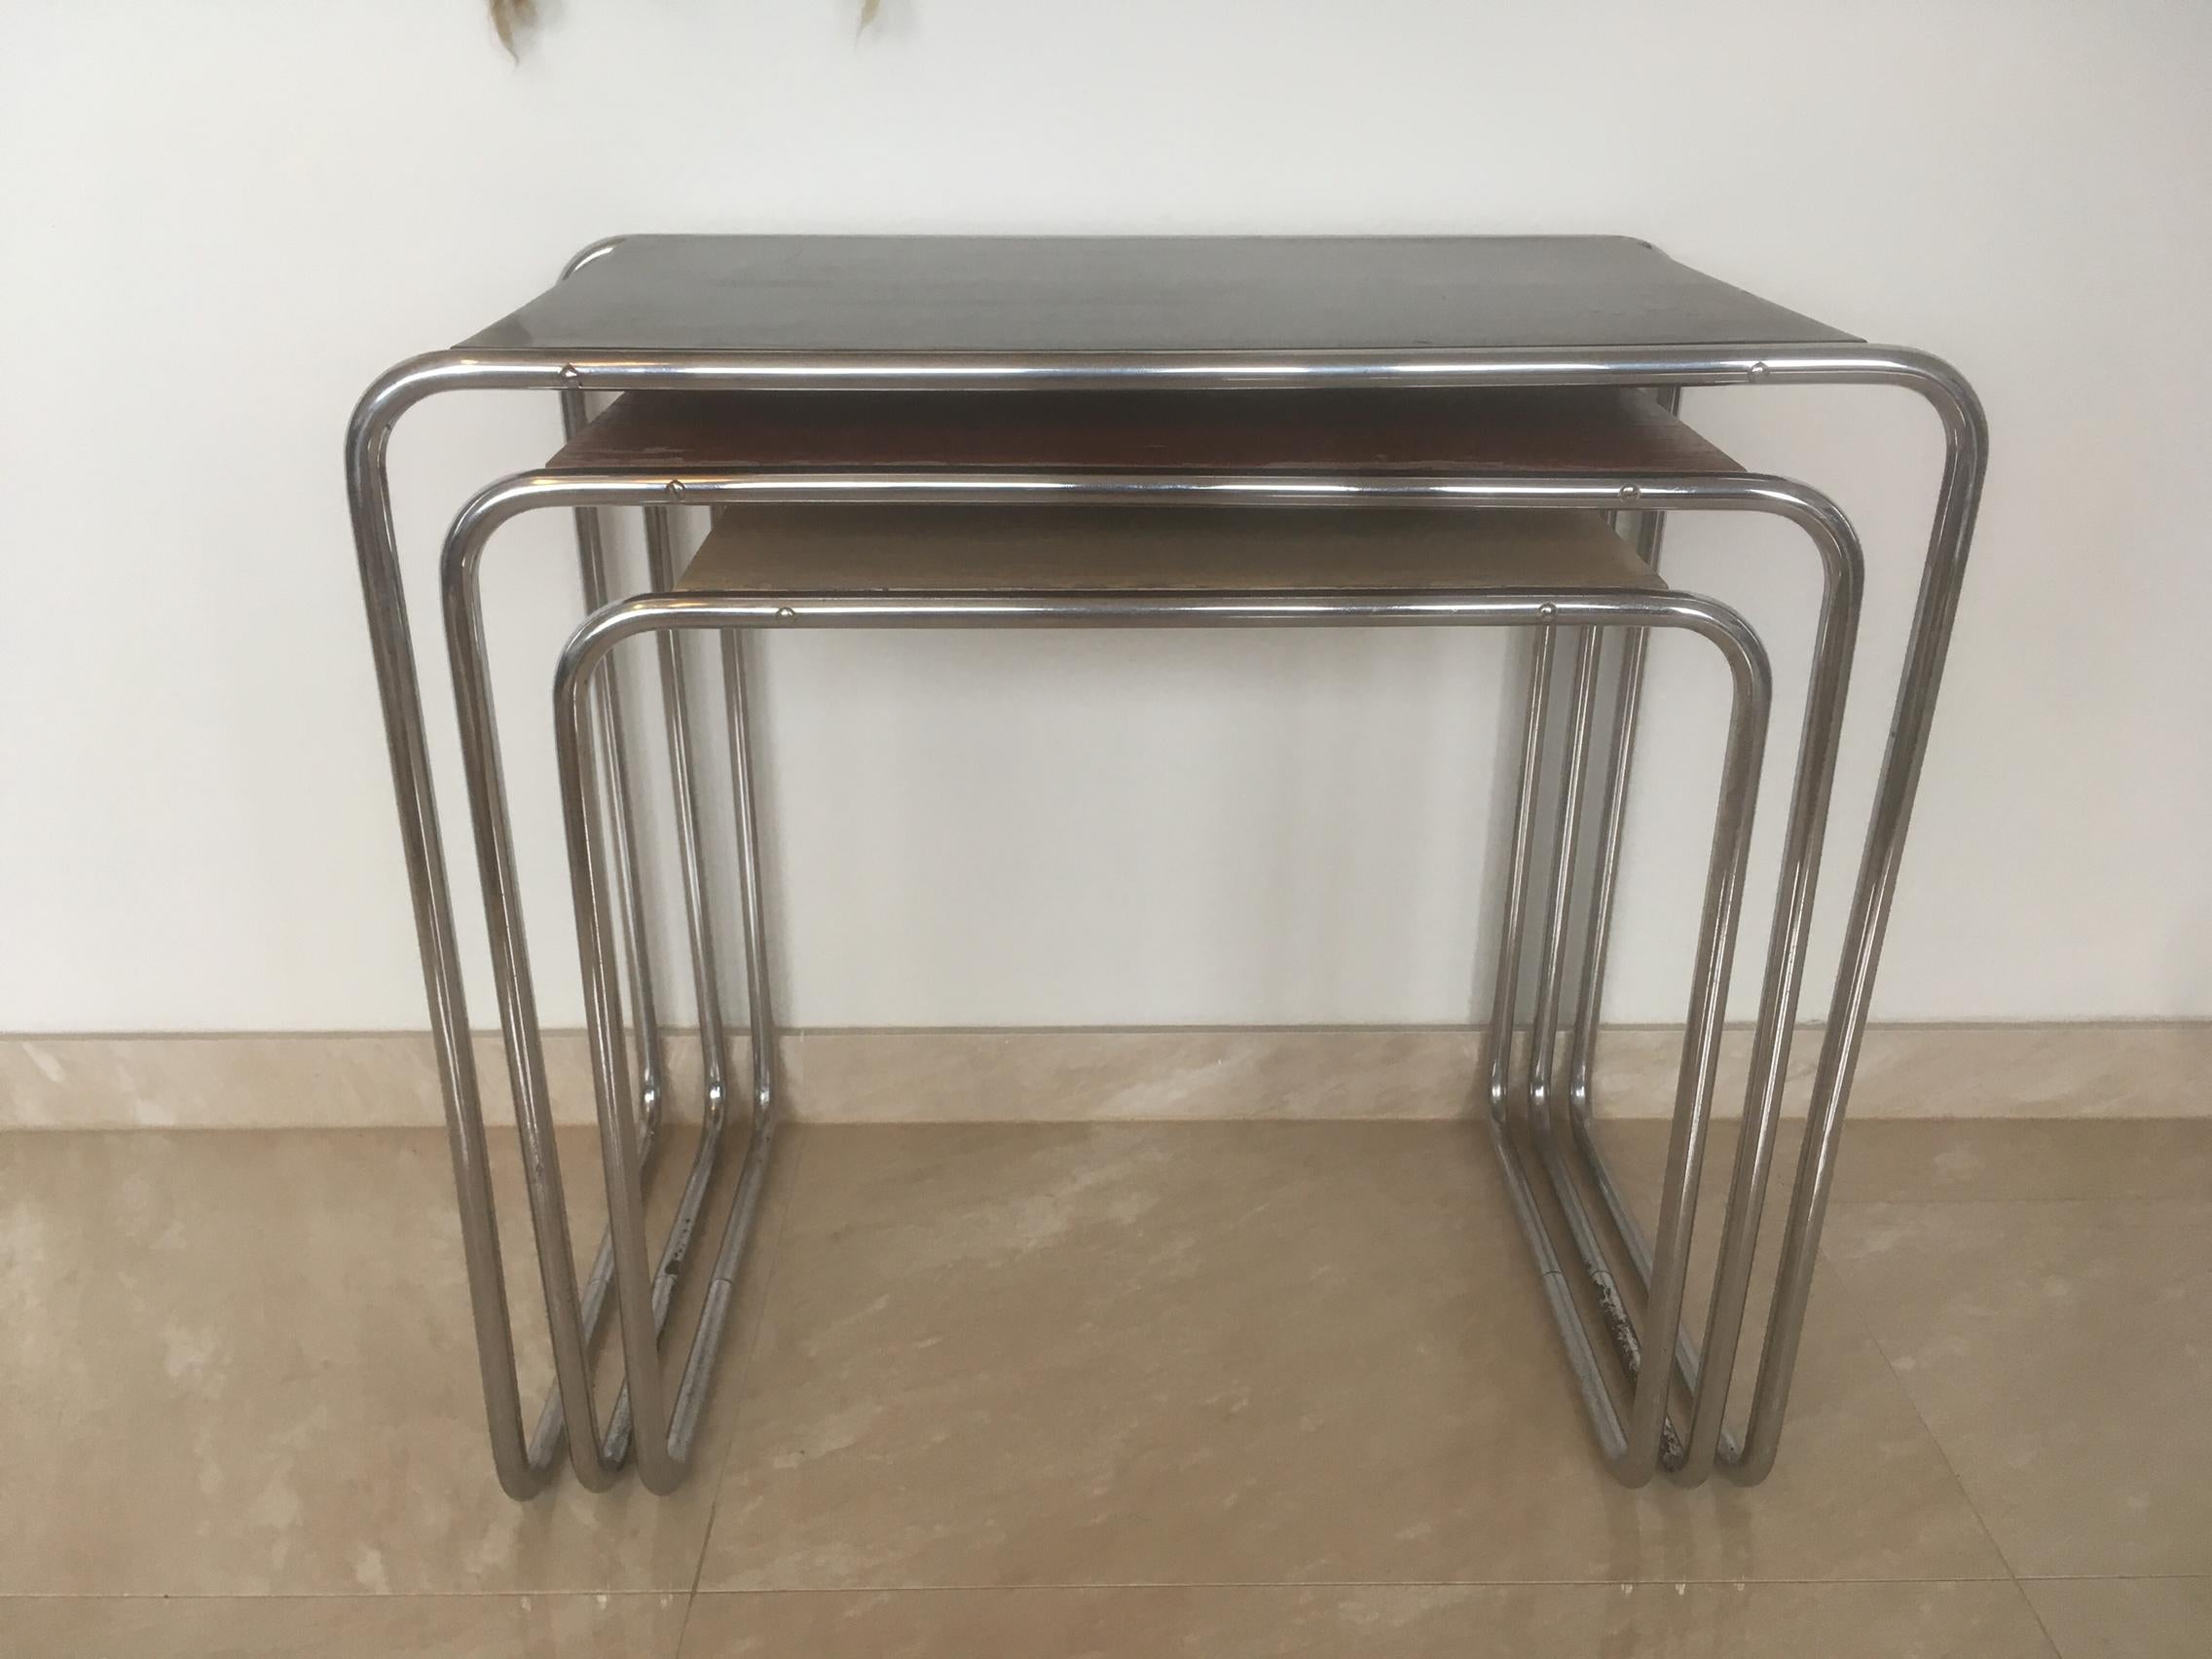 - 1930s
- Czechoslovakia
- Designed by Marcel Breuer
- Model B9
- Manufacturer: Mucke Melder (licensed for Thonet)
- Very good original condition with original colors
- Colored tables practically not seen this time
- Marked by Manufacturer.